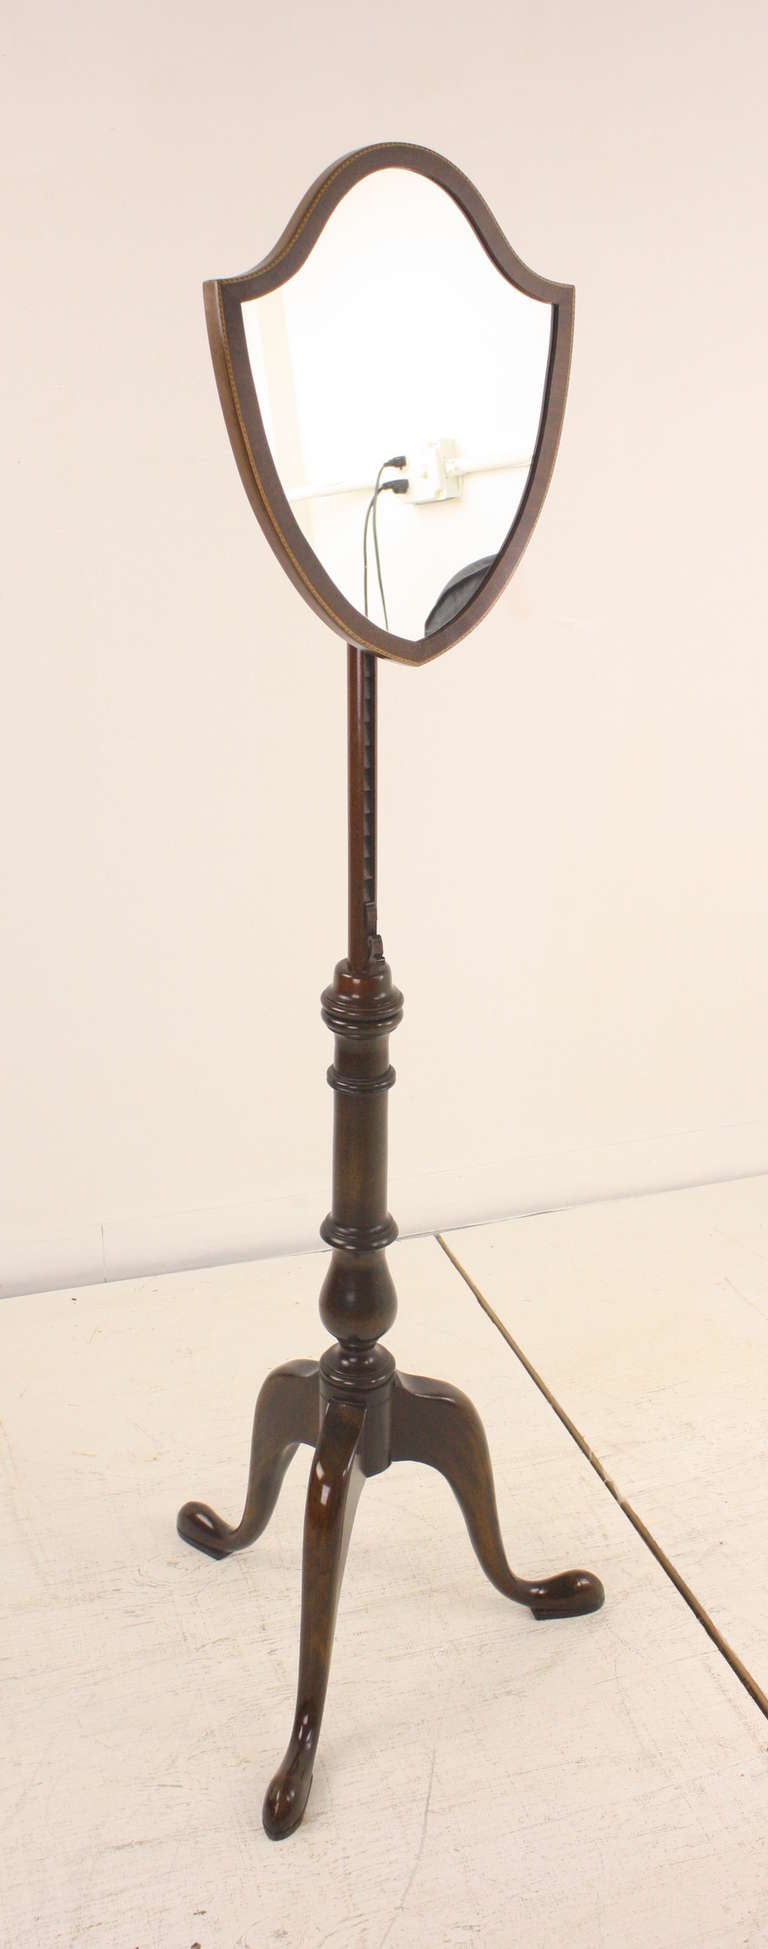 Elegant standing mirror, Classic Georgian shape. Lovely frame for the mirror adorned by excellent marquetry work. Graceful shaped feet. Adjustable. Height extends from 46